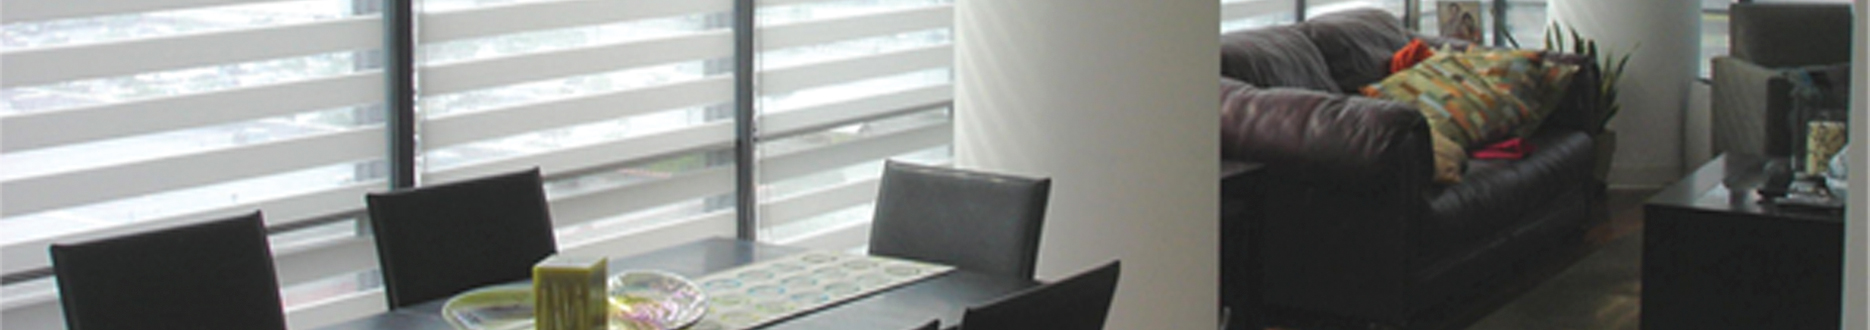 window treatments residential office